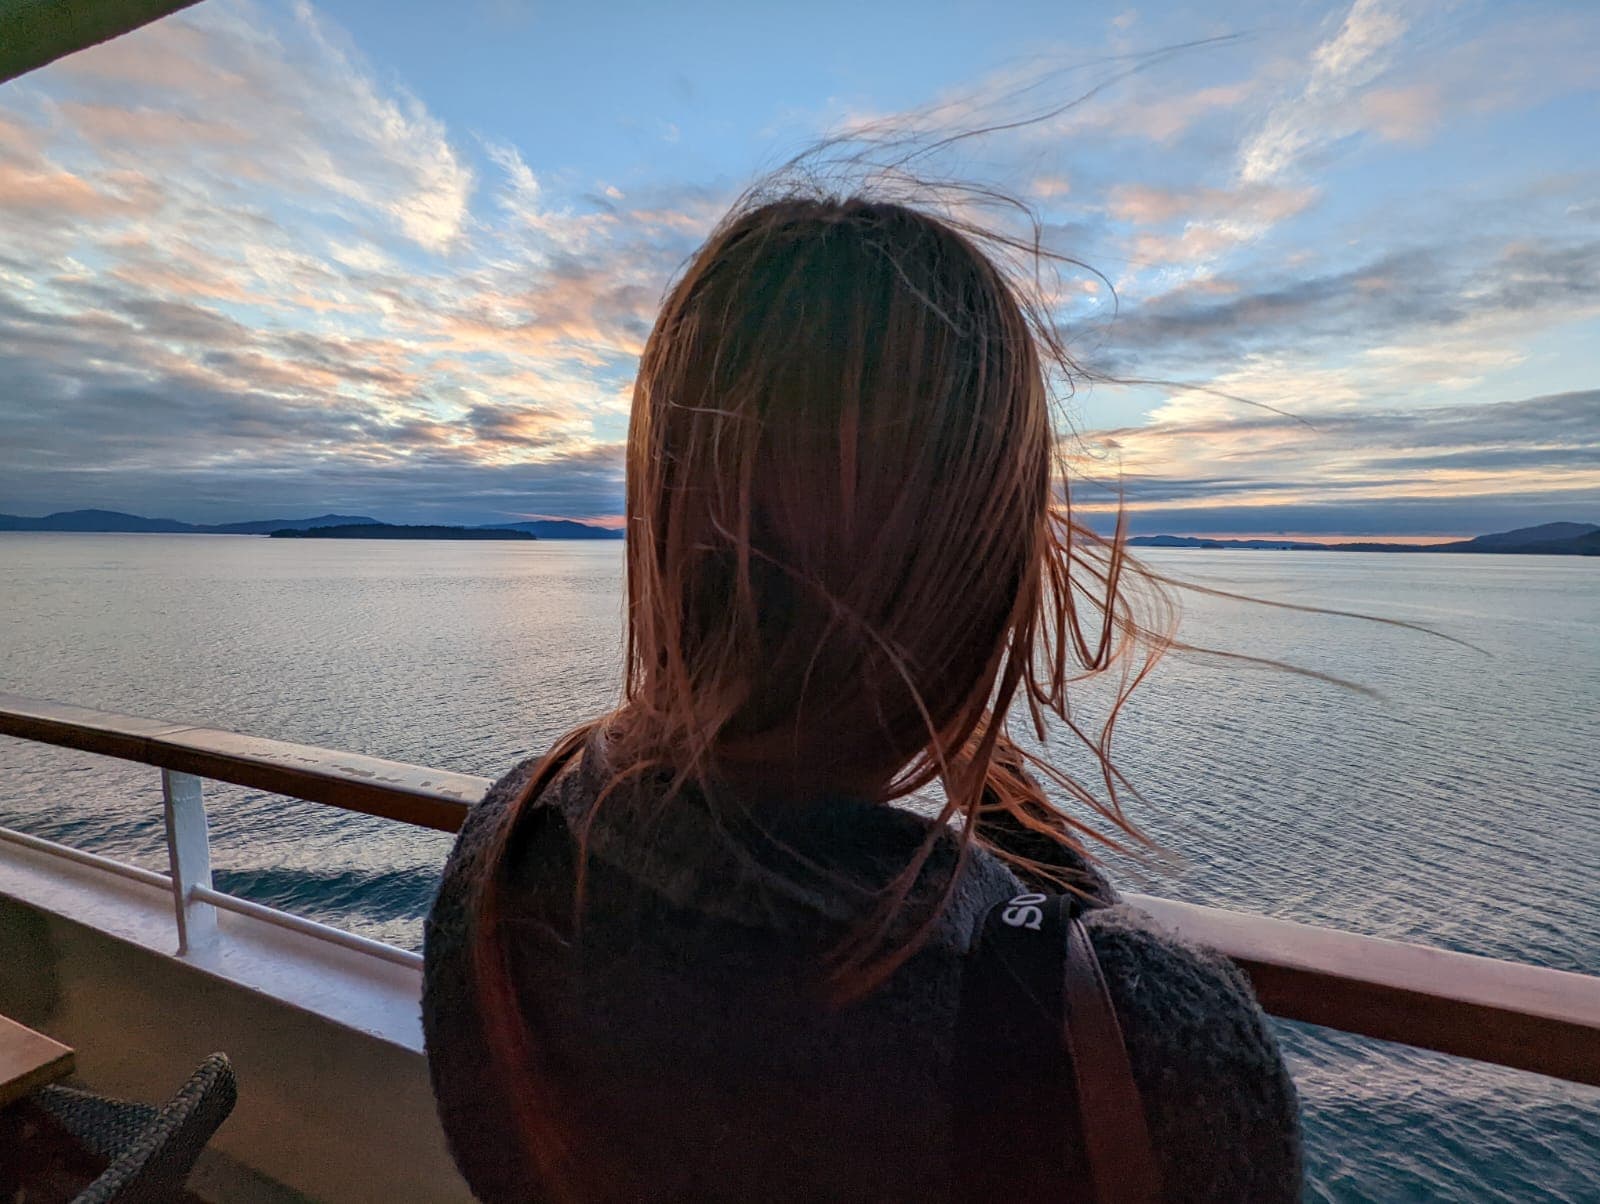 A girl looks out at the ocean from her cruise ship room